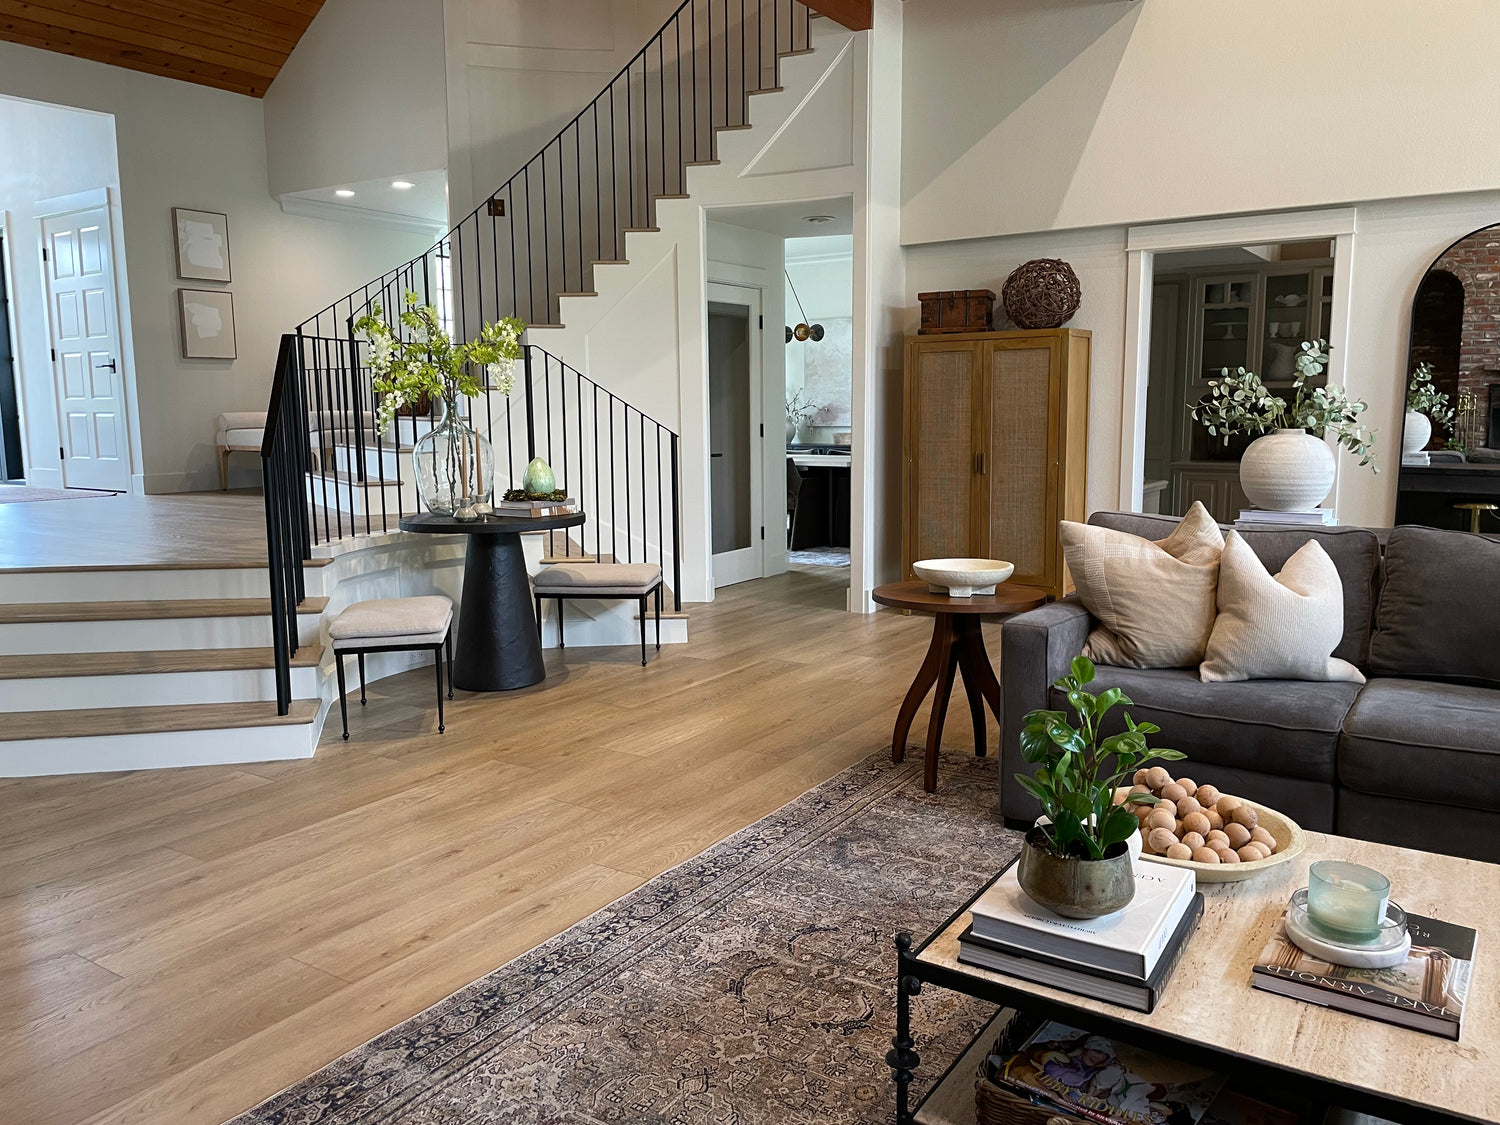 Image of Hewn Stoneform luxury plank flooring on a staircase and in a living room